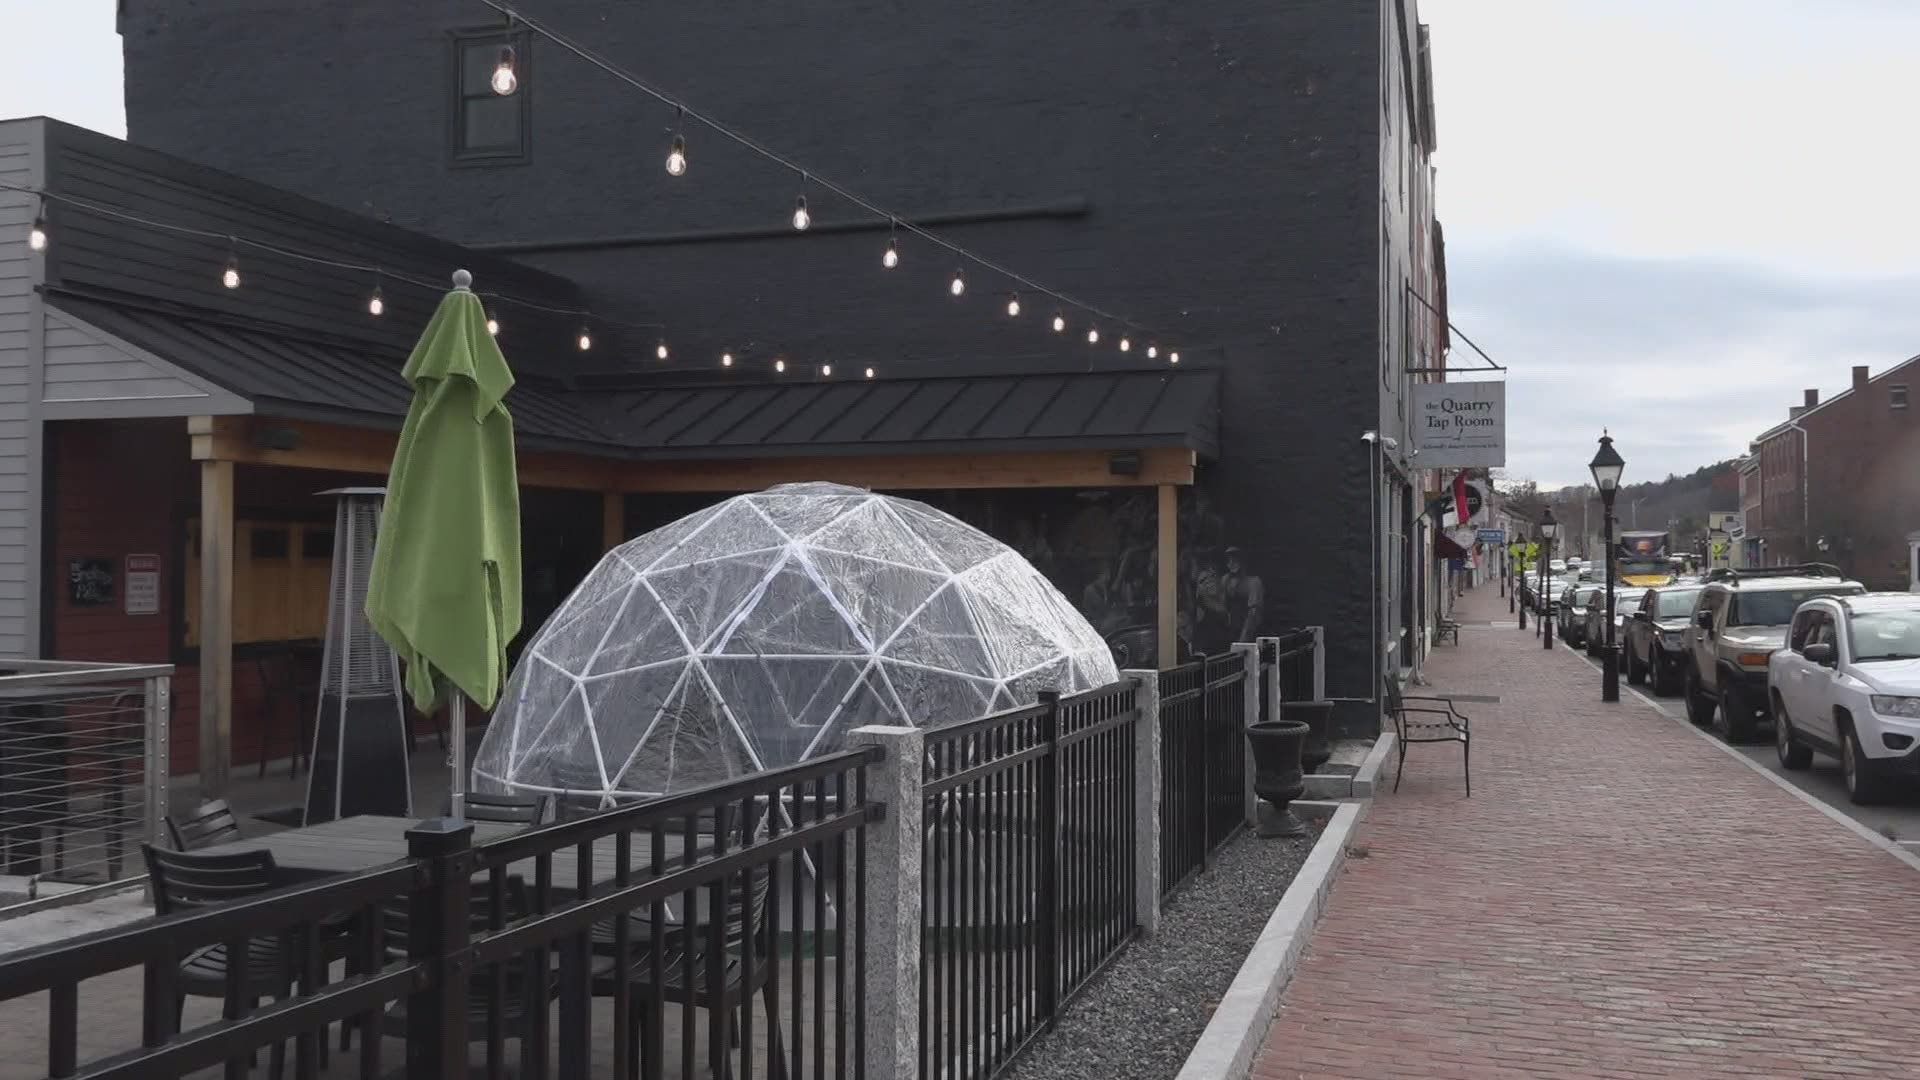 Restaurants like Chaval in Portland and Timber in Bangor, find creative uses of heated shelters to stay in operation during the pandemic in winter.